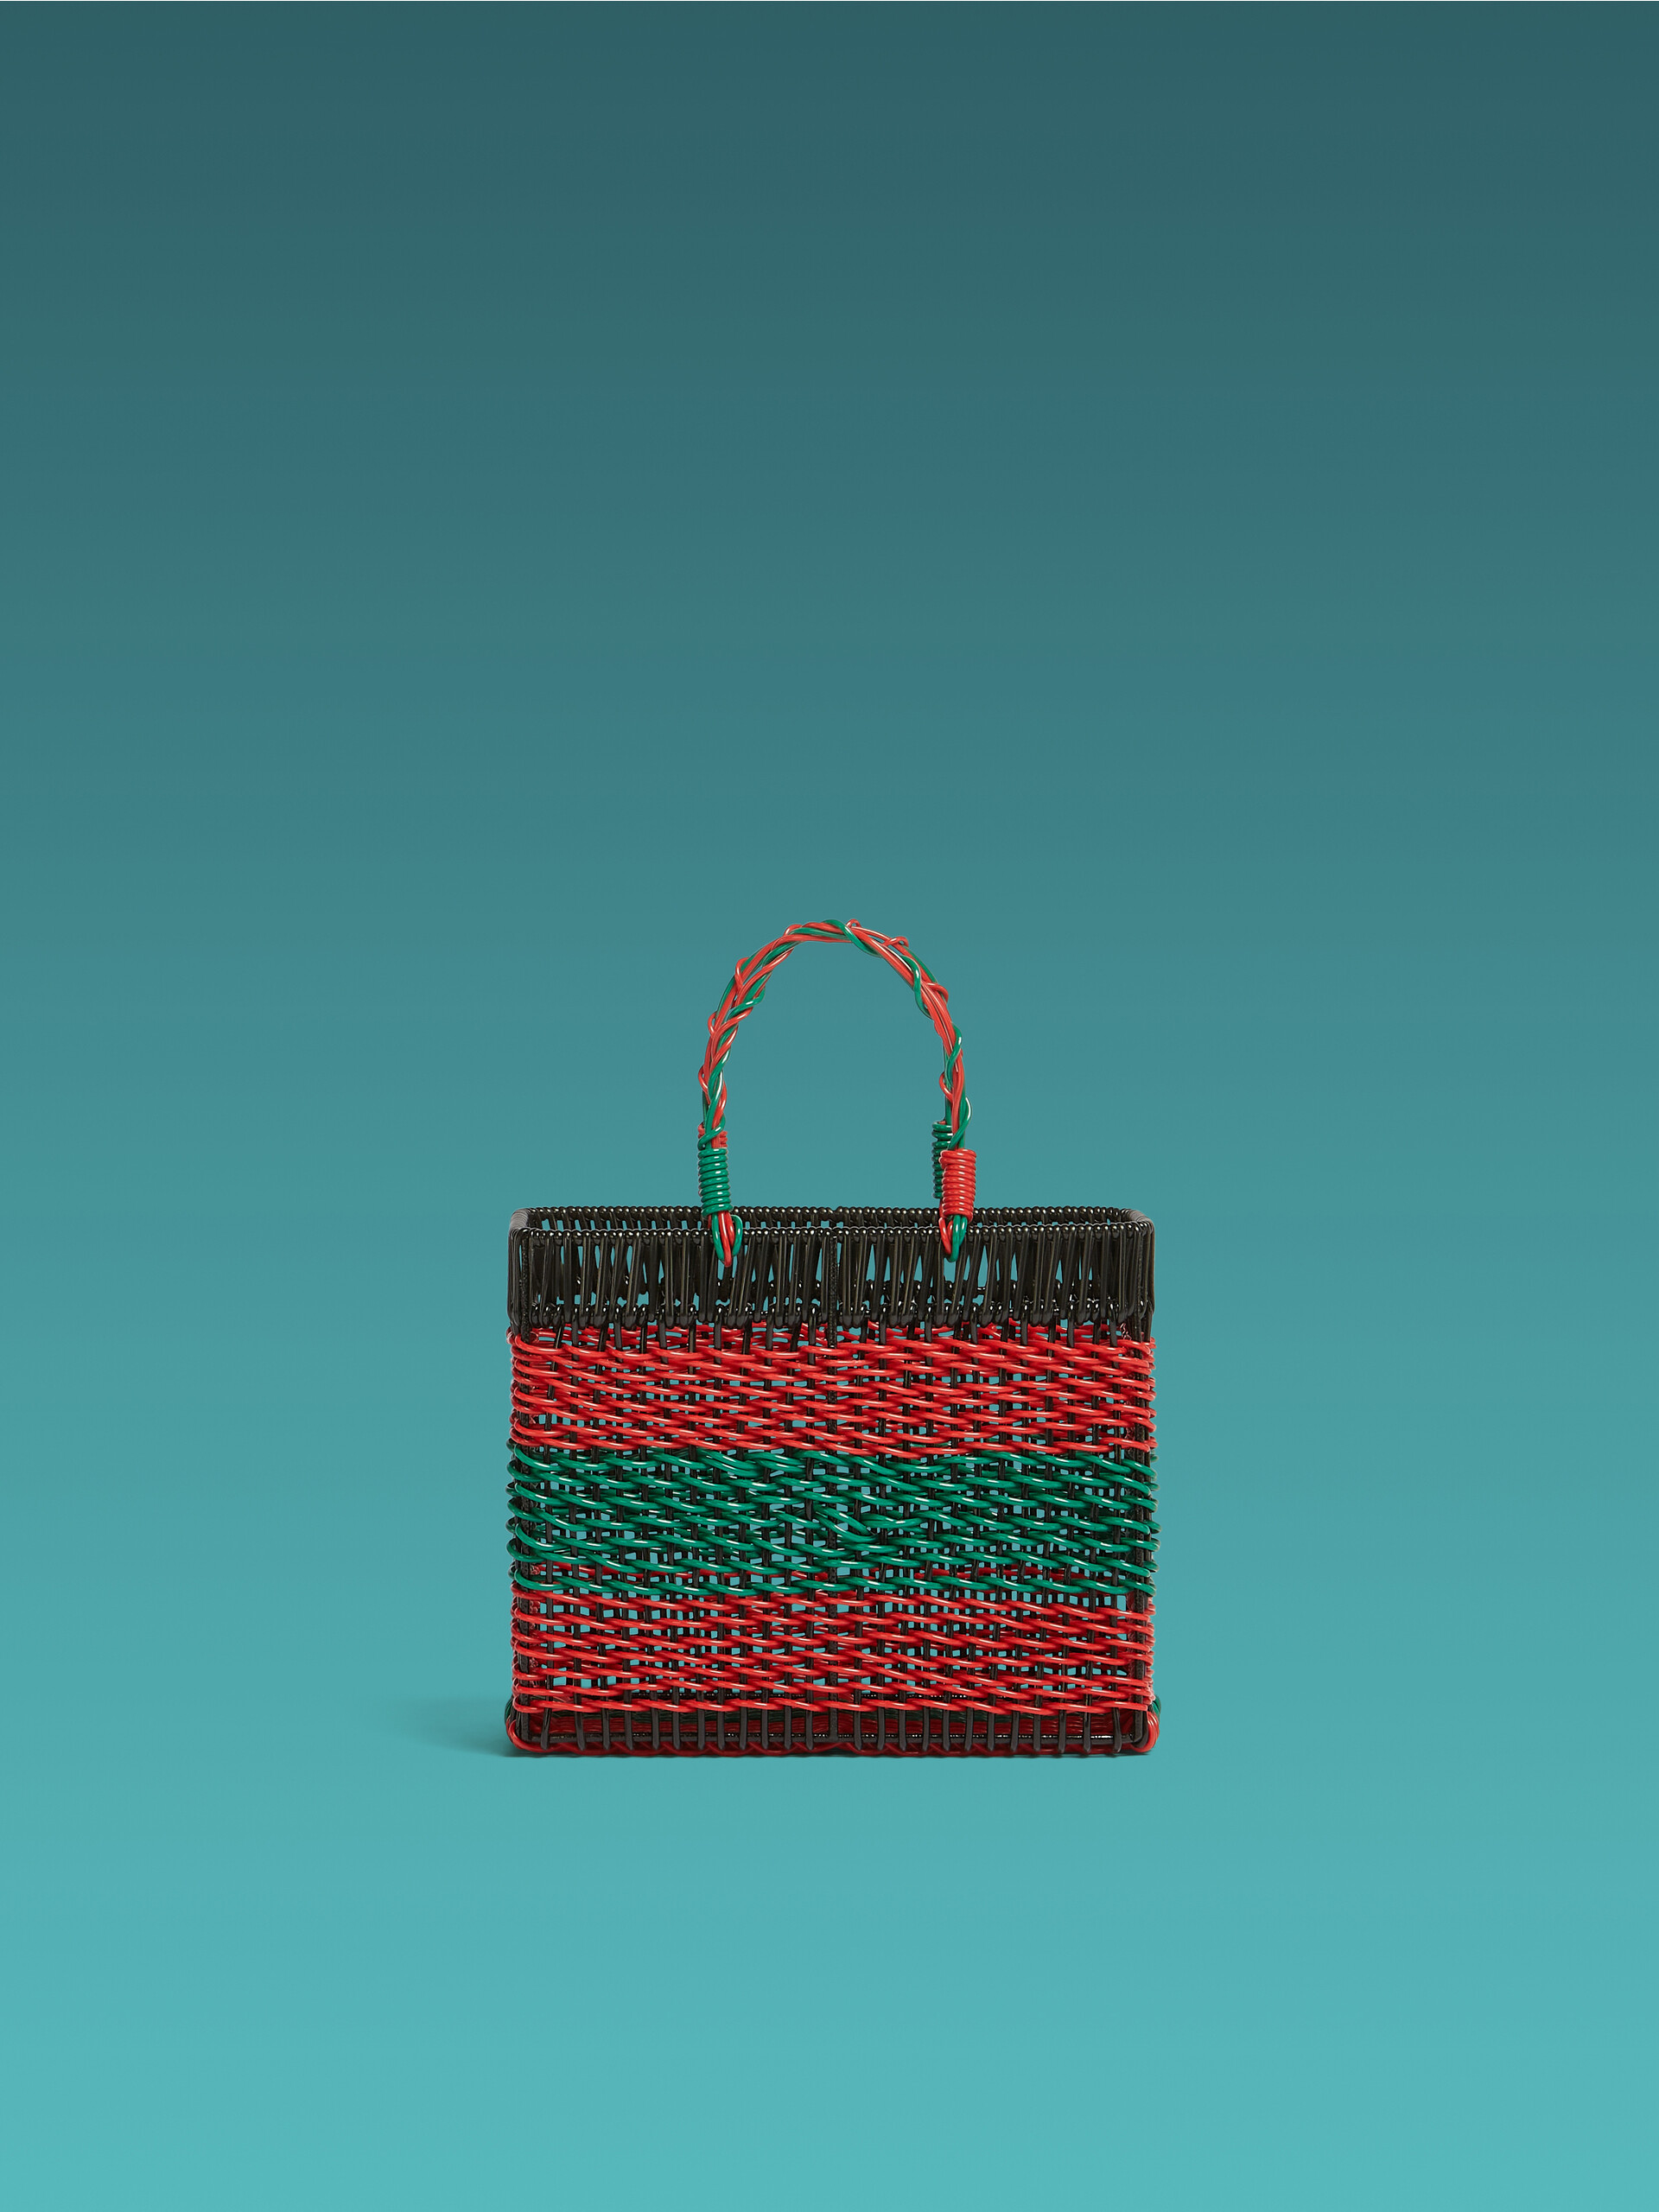 MARNI MARKET green and red basket - Accessories - Image 1